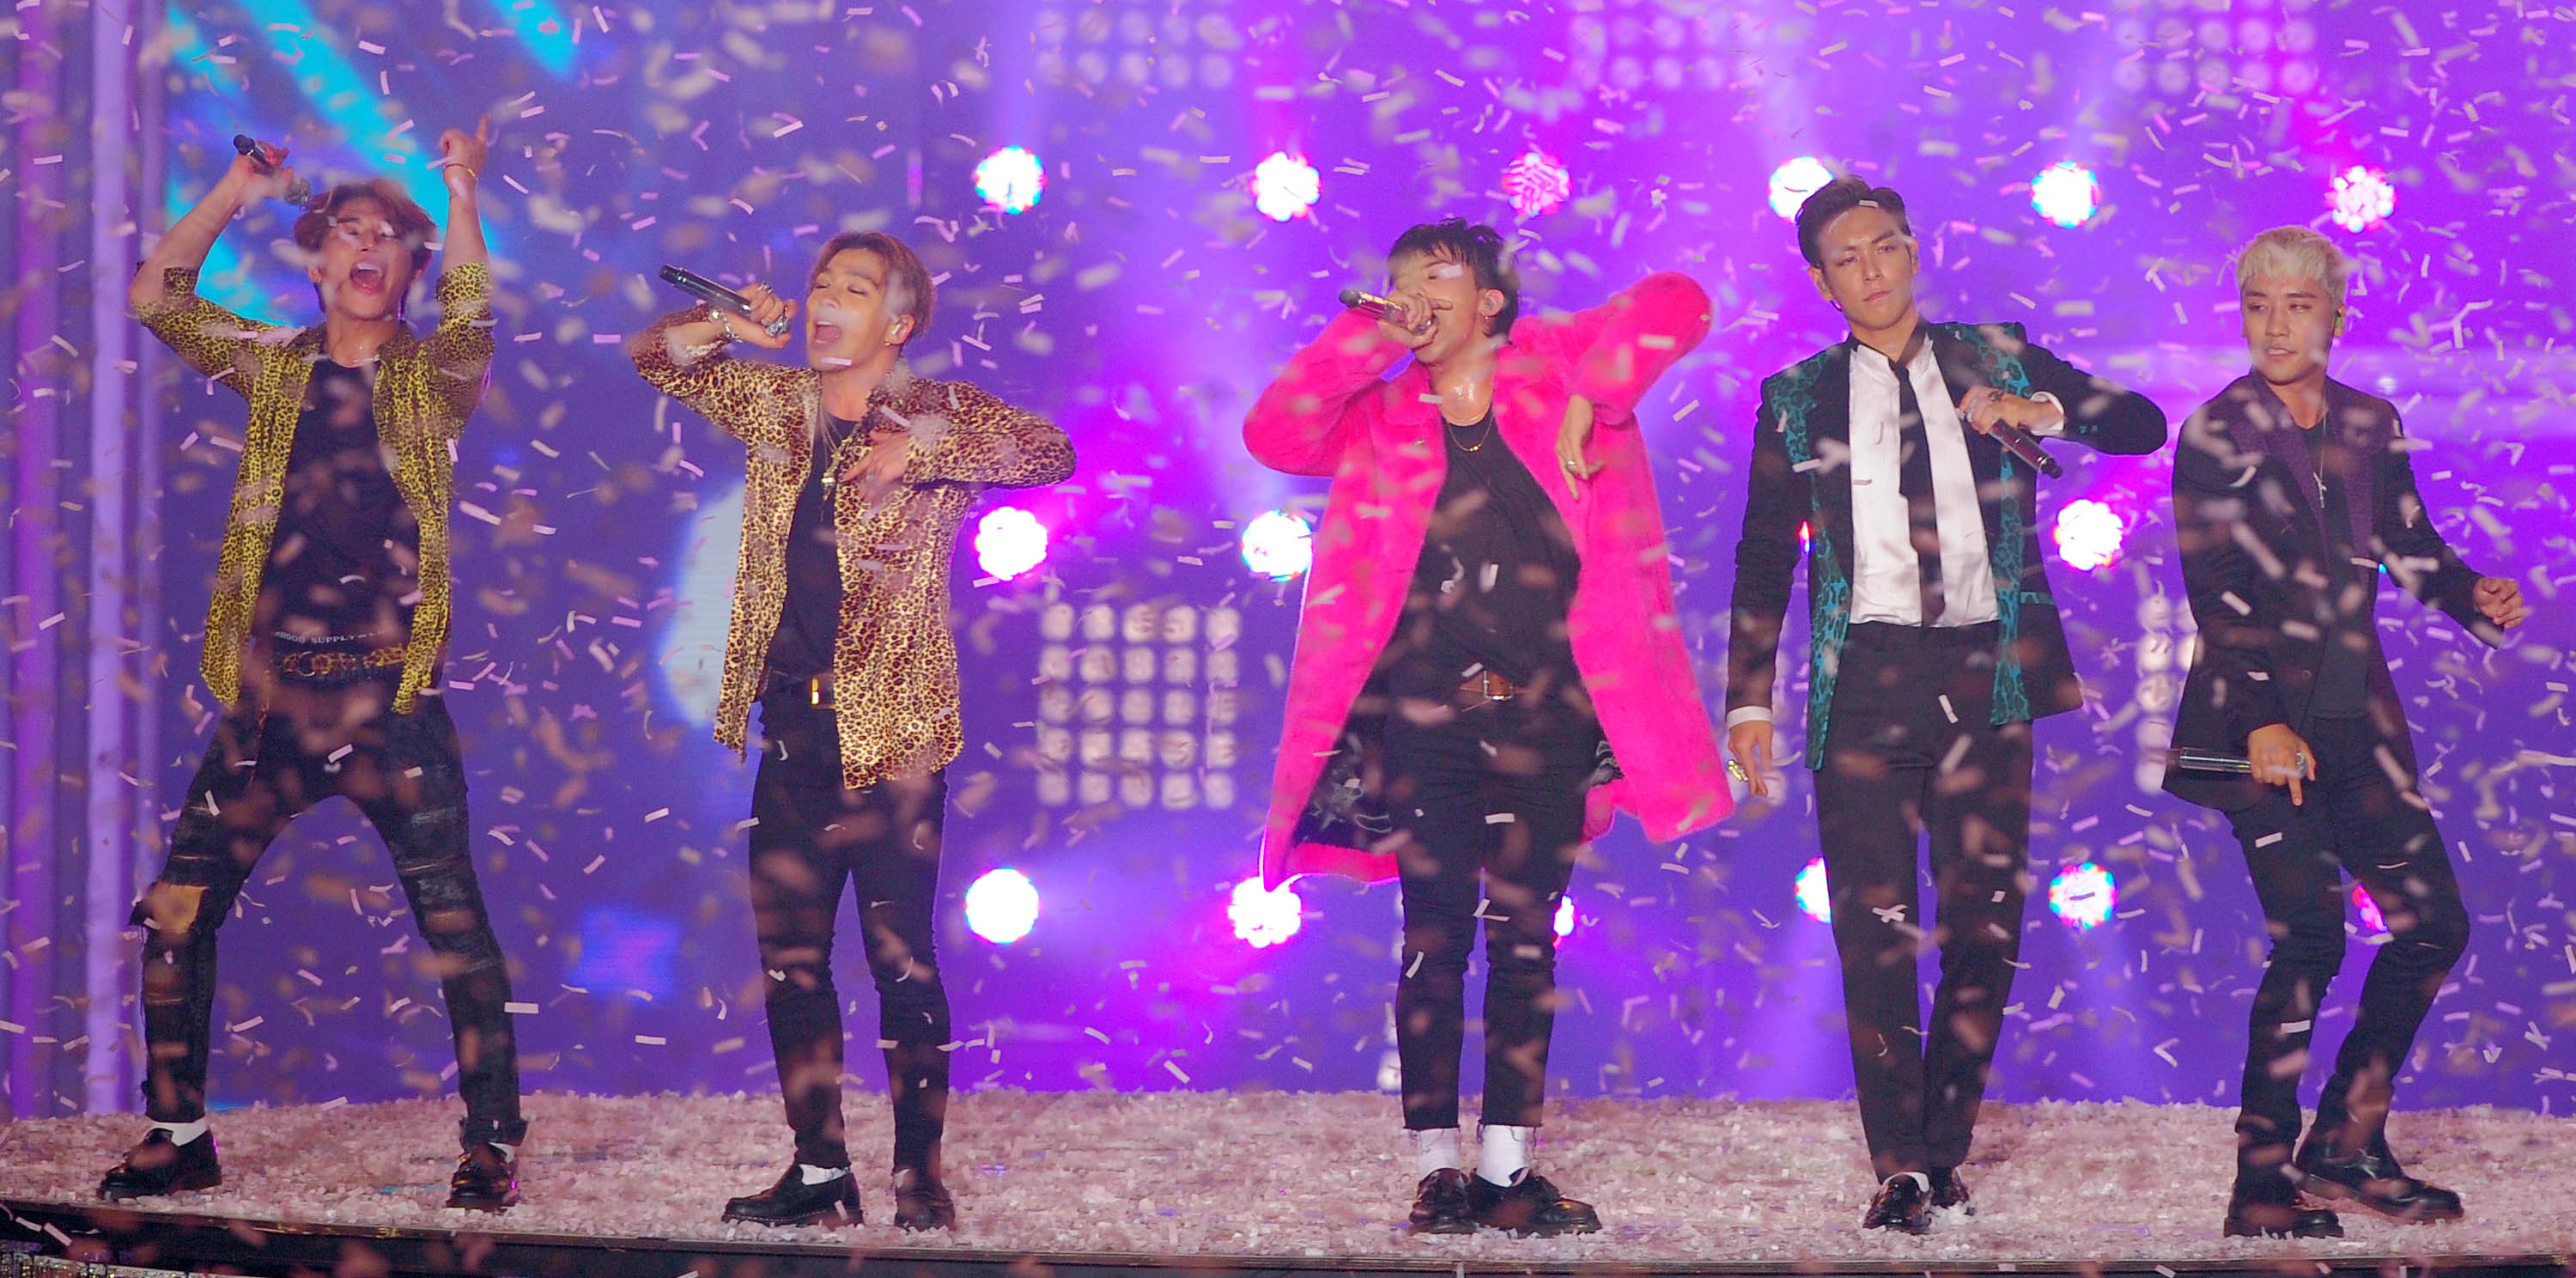 BIGBANG The biggest boy band in the world you probably haven’t heard